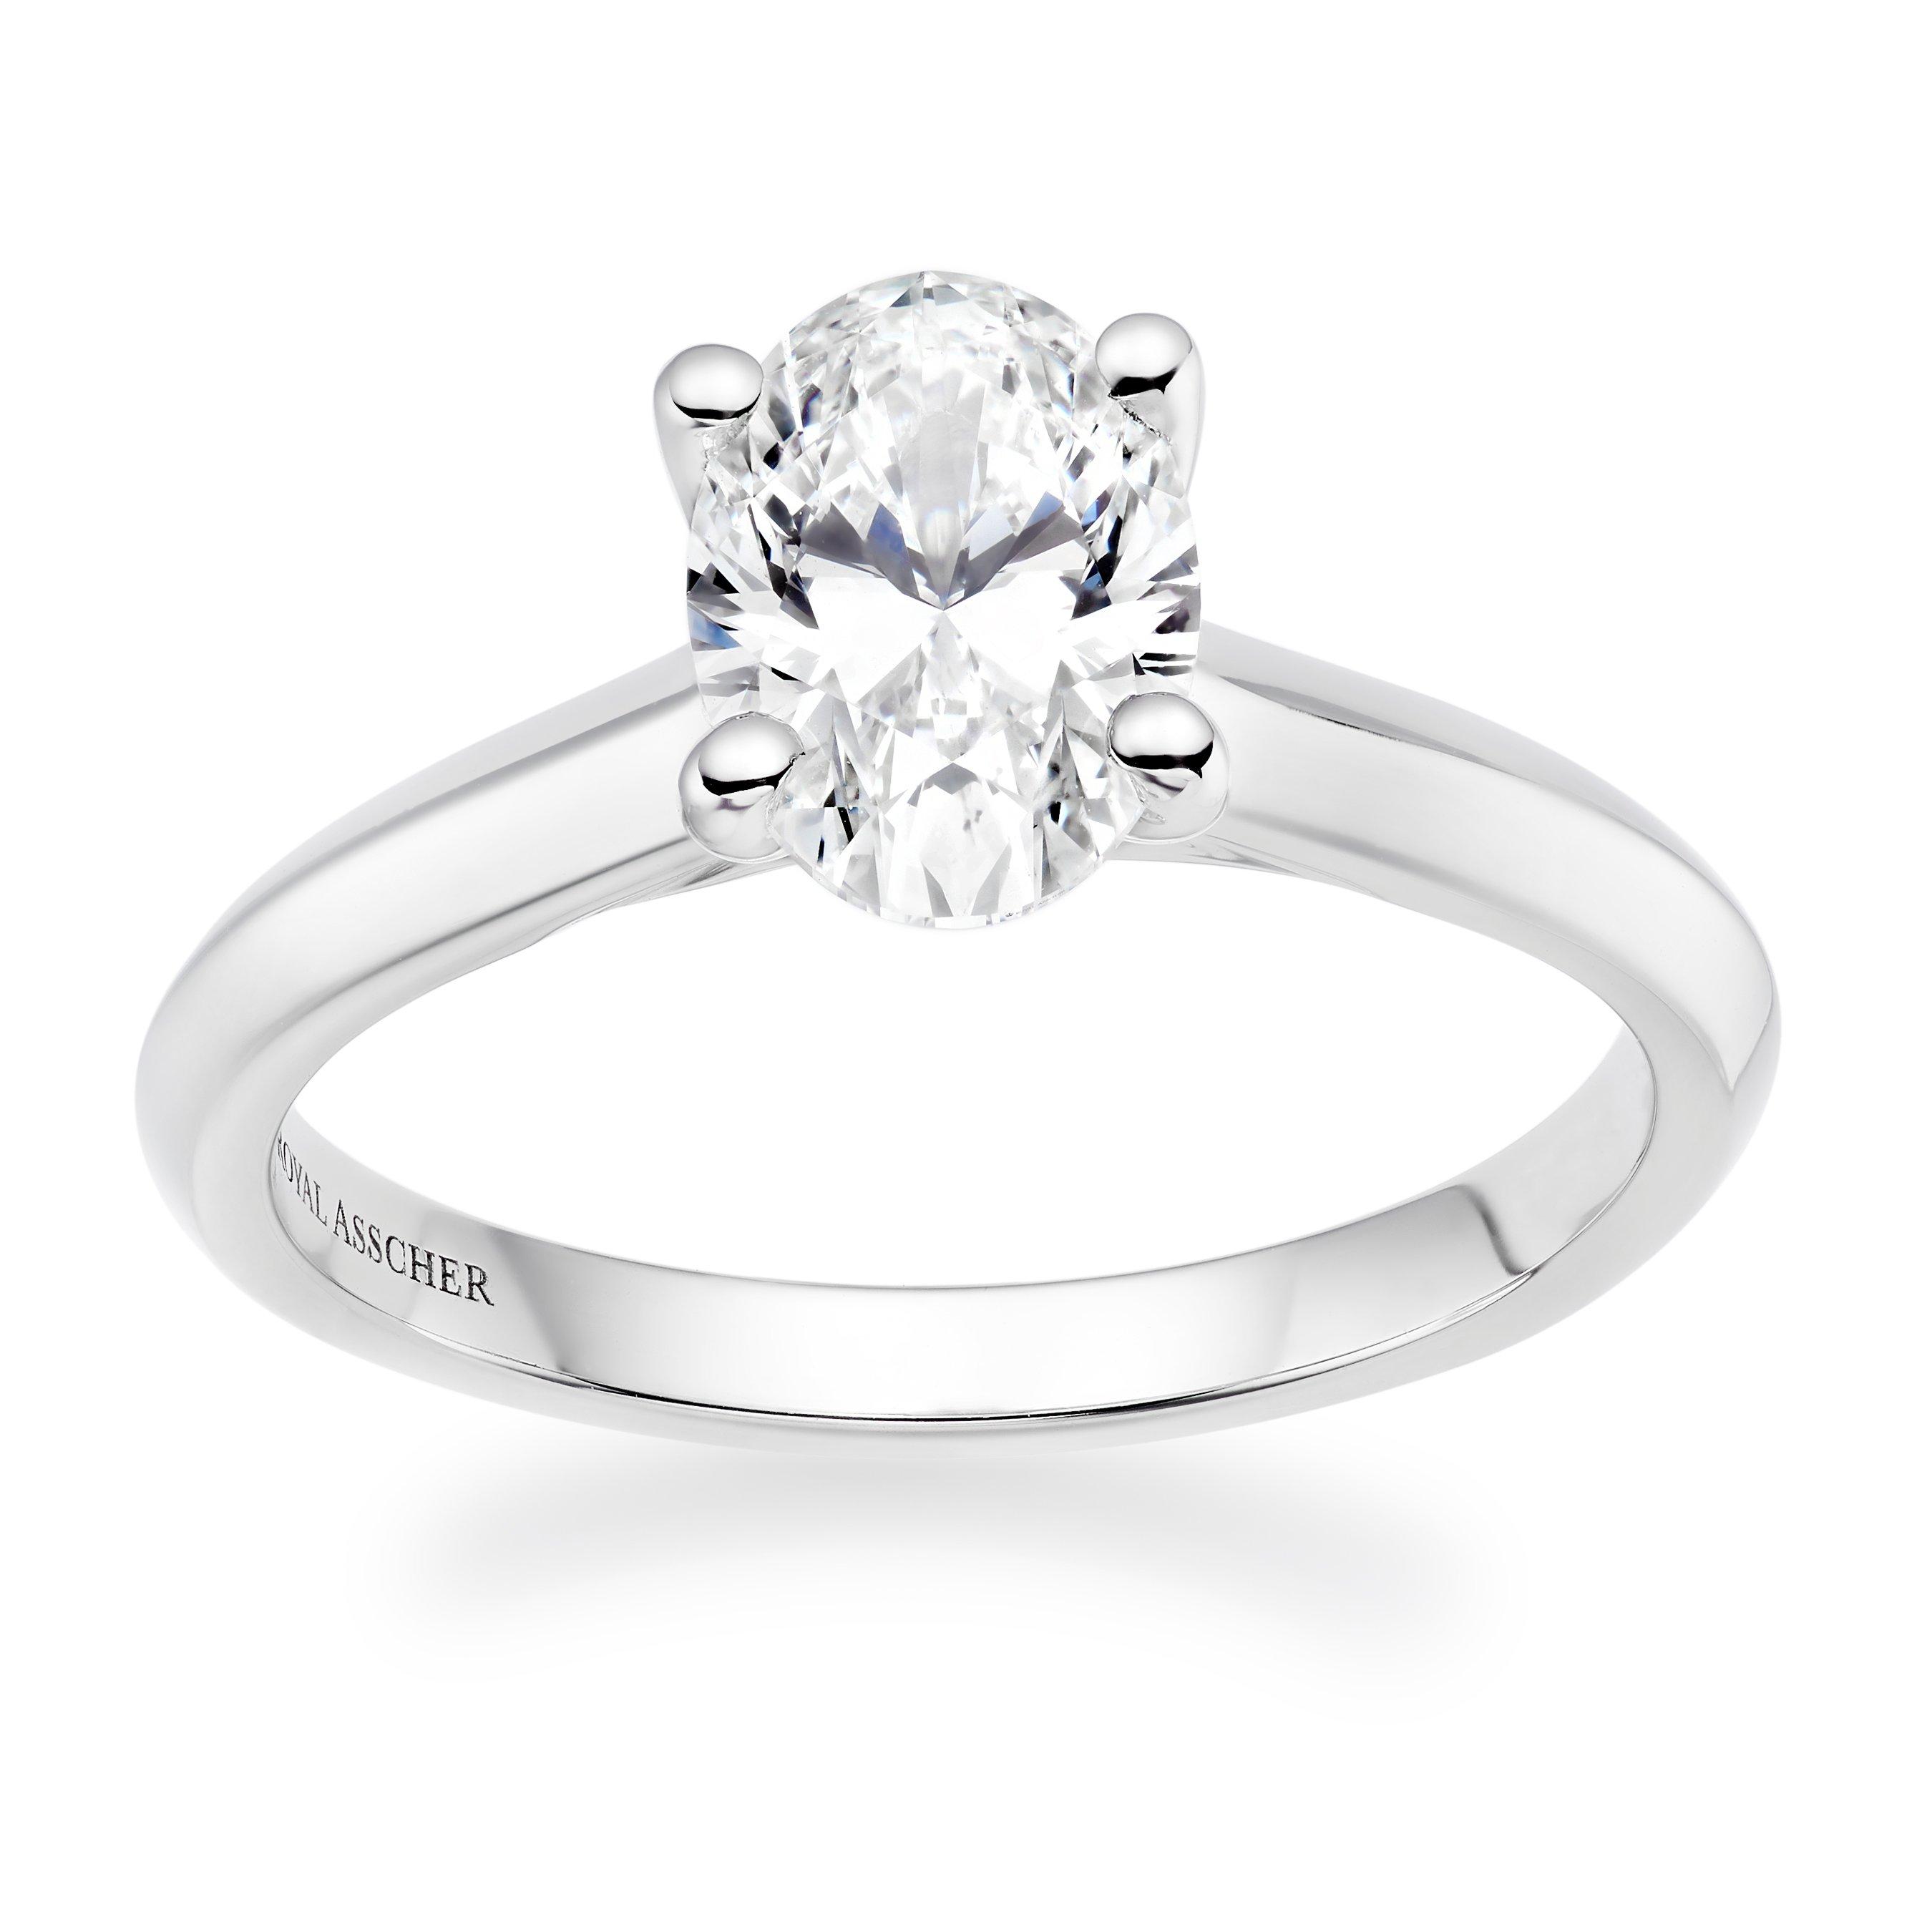 Royal Asscher Diamond Solitaire Ring in Platinum | LOU-0124707 | Loupe